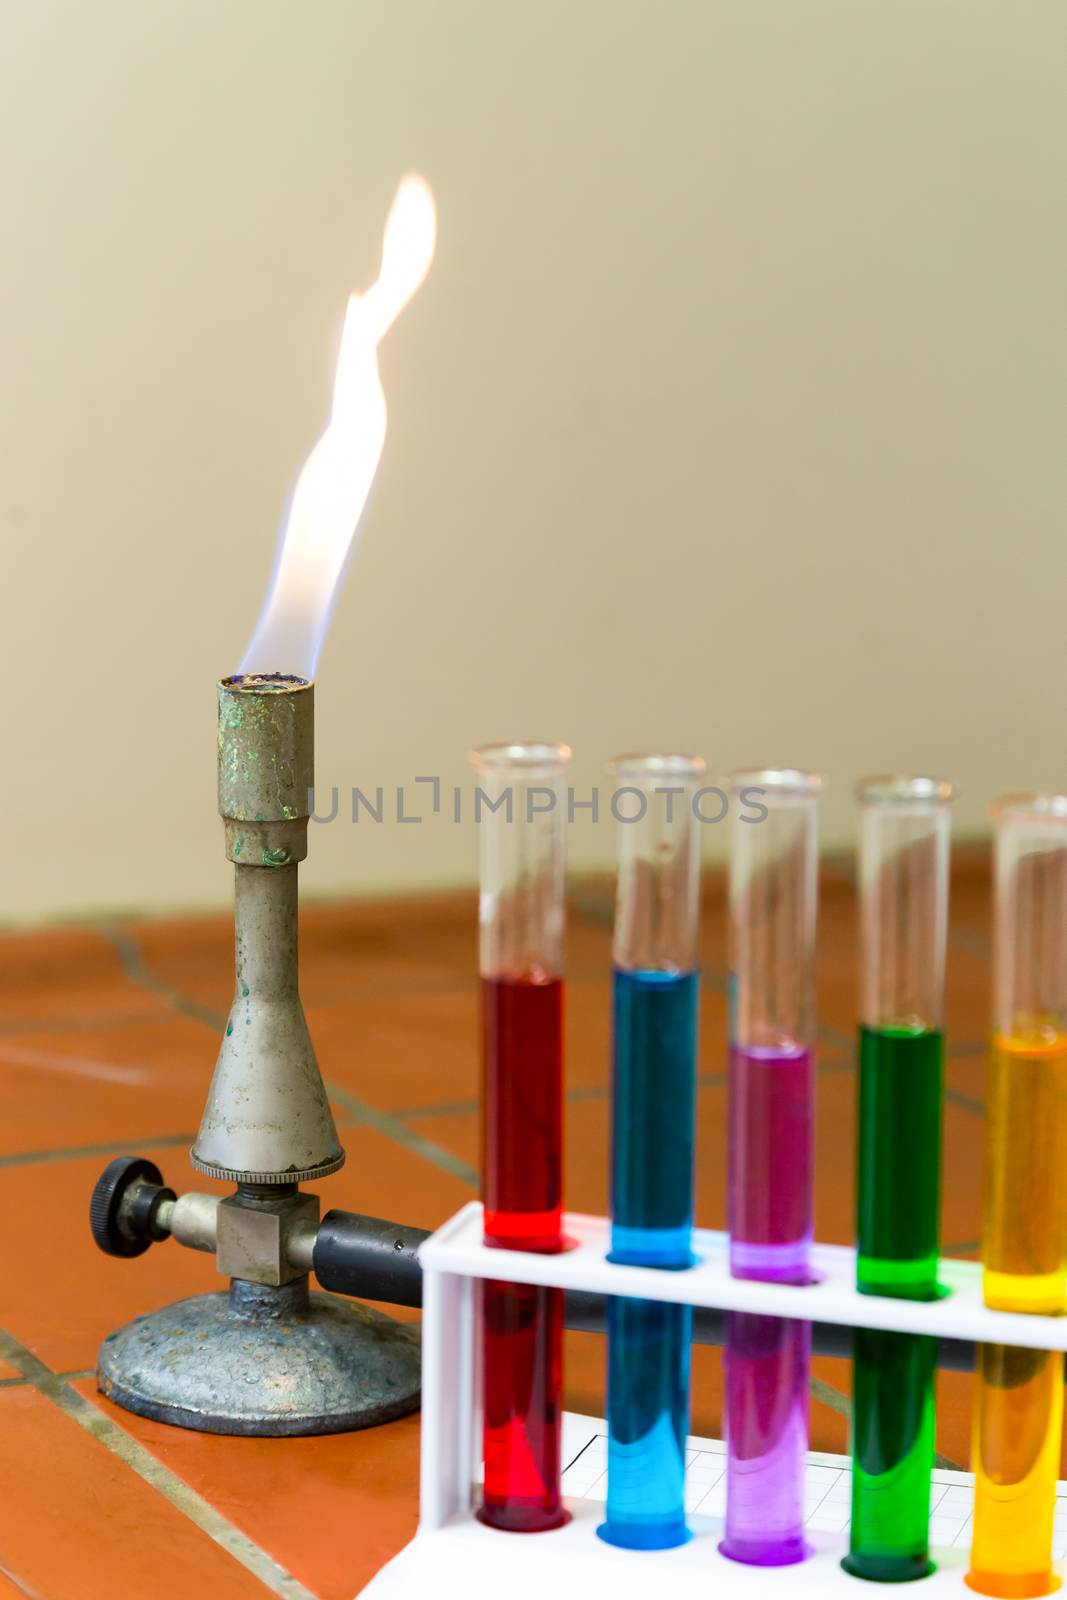 Flaming gas burner with colored test tubes in chemistry lab